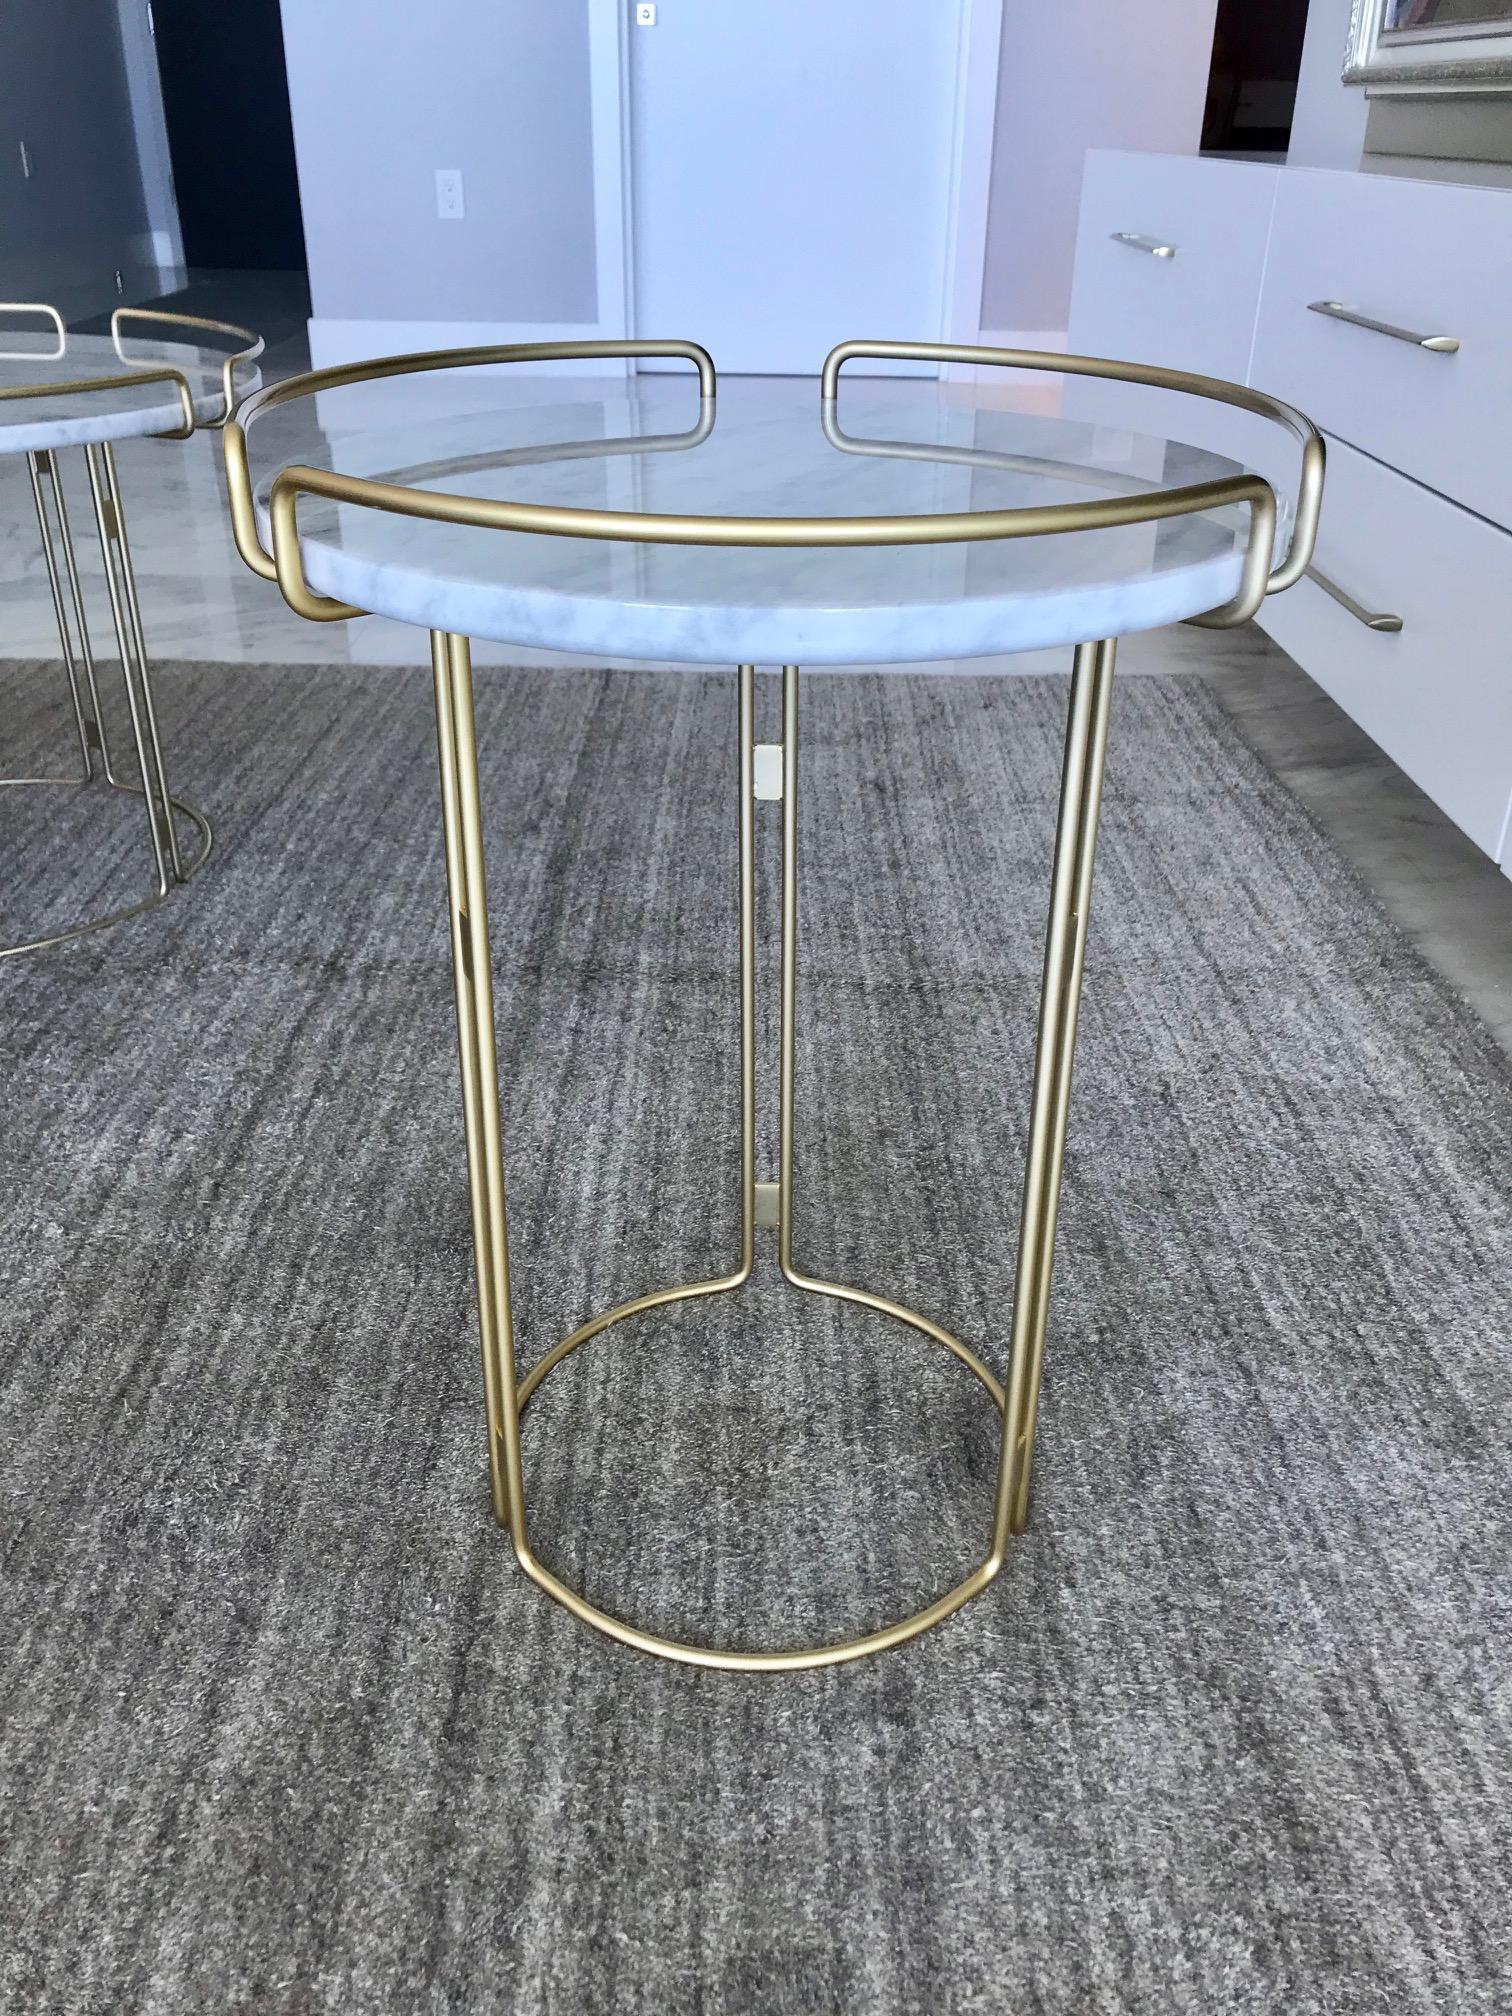 Lacquered Bijou Pedestal Table in Marble and Matte Gold by Roche Bobois